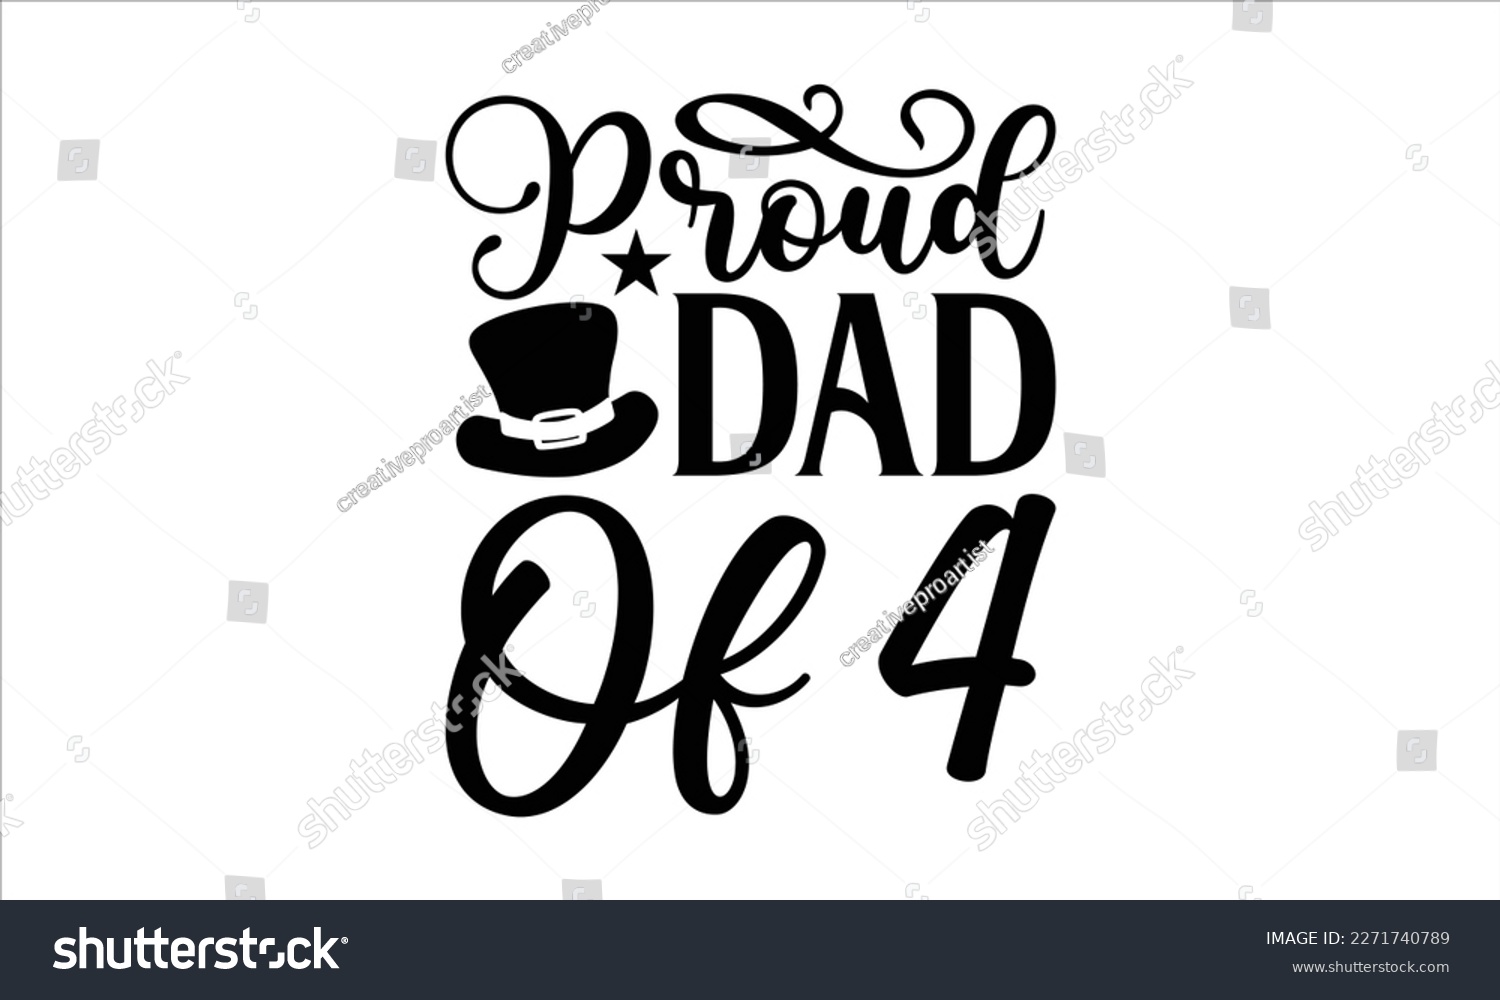 SVG of proud dad of 4- Father's Day svg design, Hand drawn lettering phrase isolated on white background, Illustration for prints on t-shirts and bags, posters, cards eps 10. svg